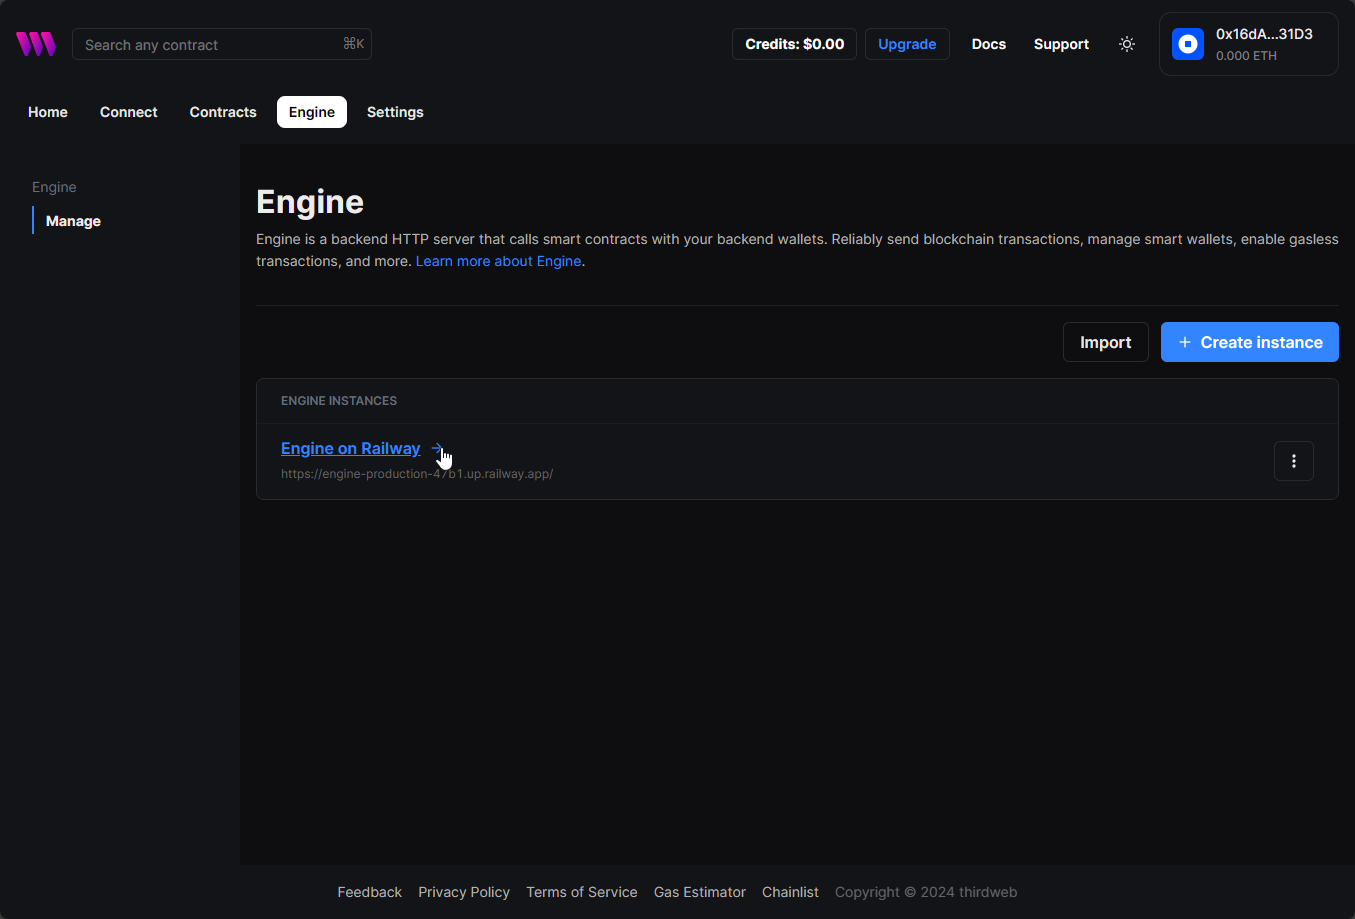 Screenshot of thirdweb web interface titled "Engine," describing it as an HTTP server for smart contracts, with options to manage instances and a link to an instance named "Engine on Railway."